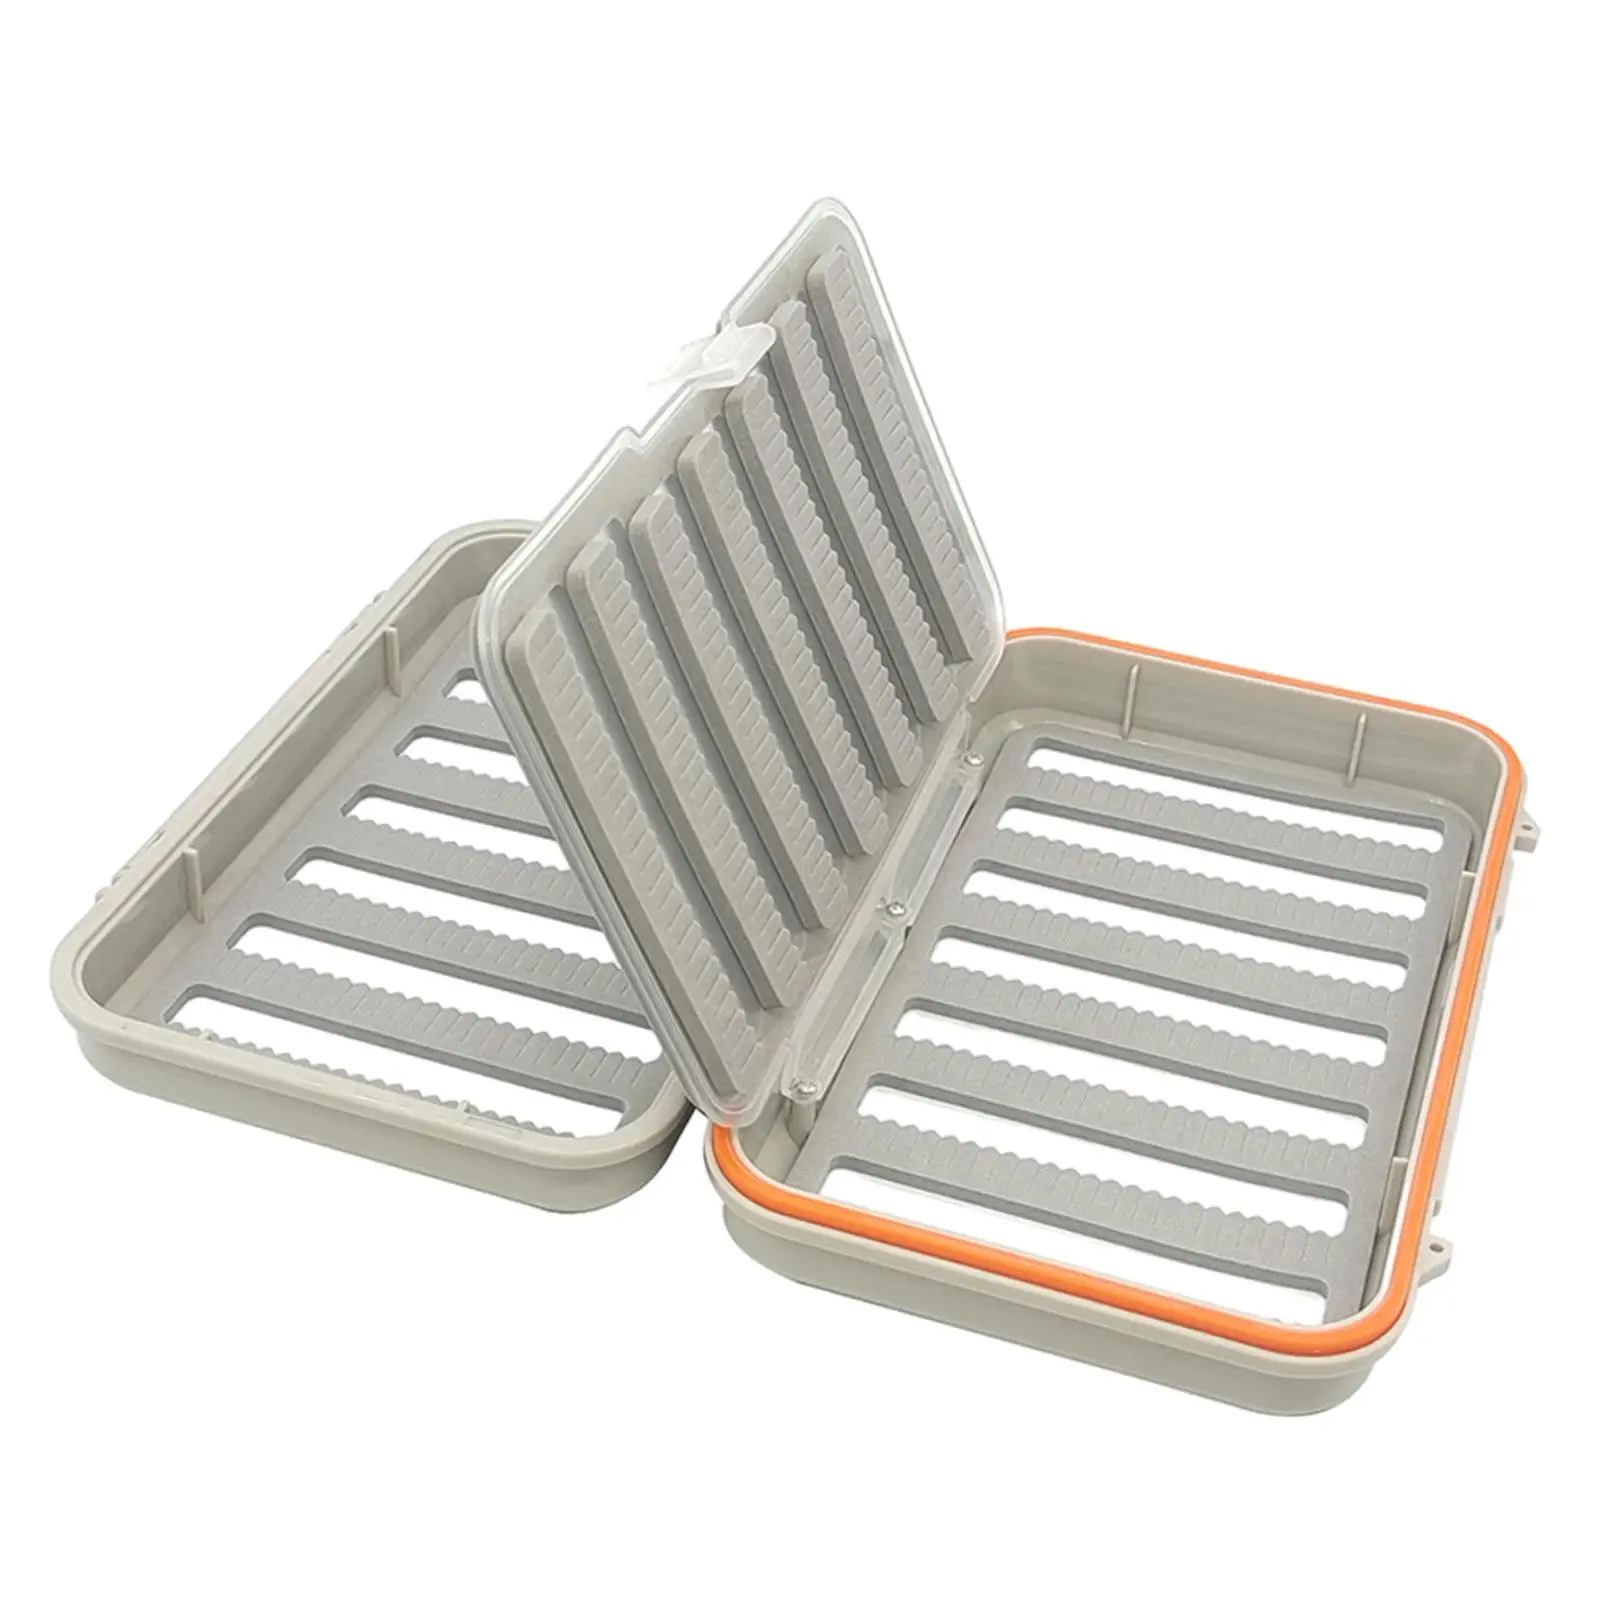 Waterproof Fly Box Organizer Fly Fishing Storage Case for Bass Trout Gear Dry